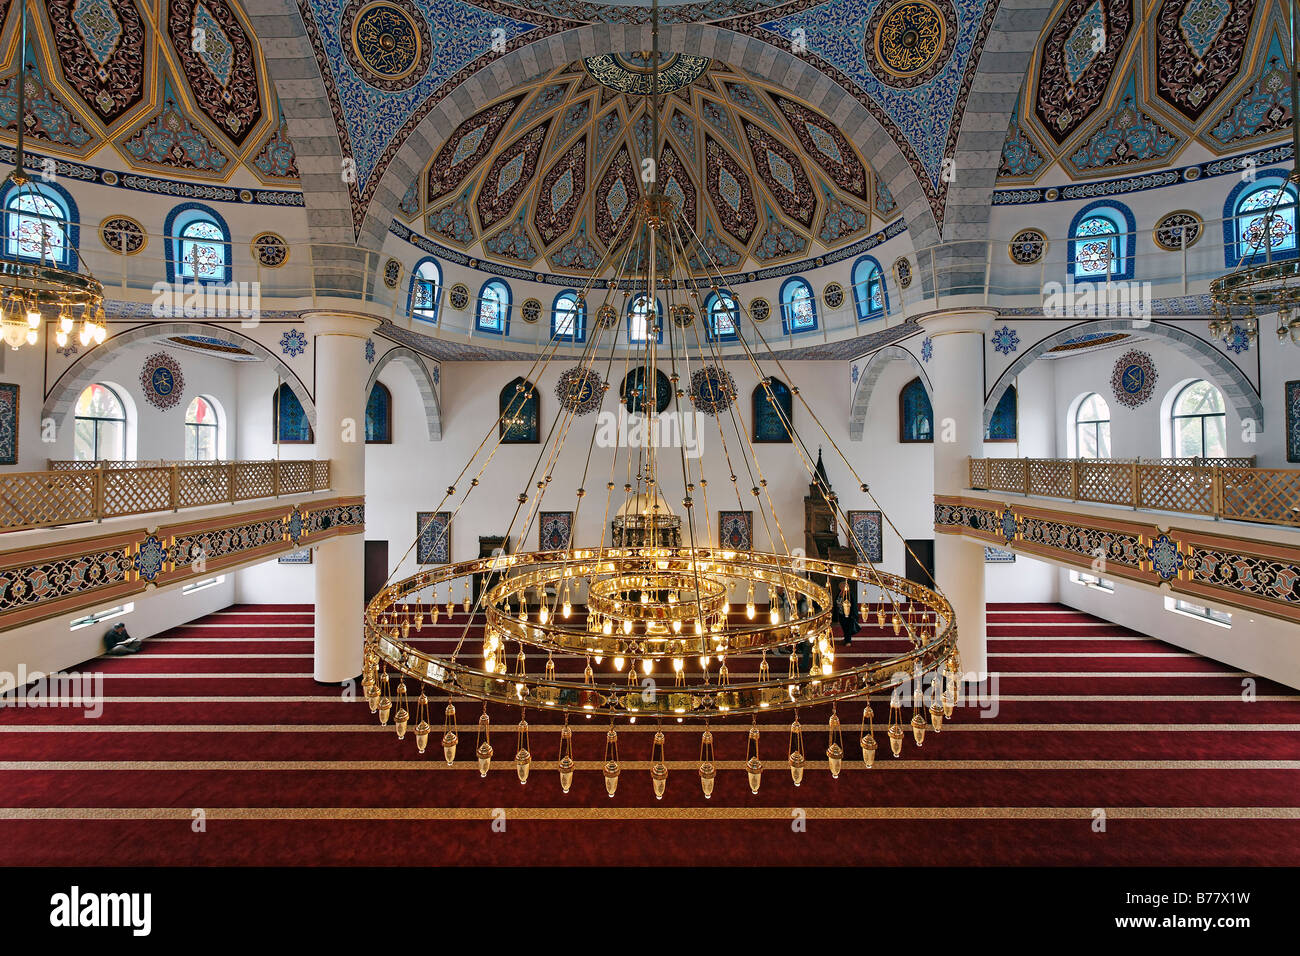 DITIB-Merkez-Mosque, interior view, newly built in the Ottoman style, one of the largest mosques in Germany, Duisburg-Marxloh,  Stock Photo